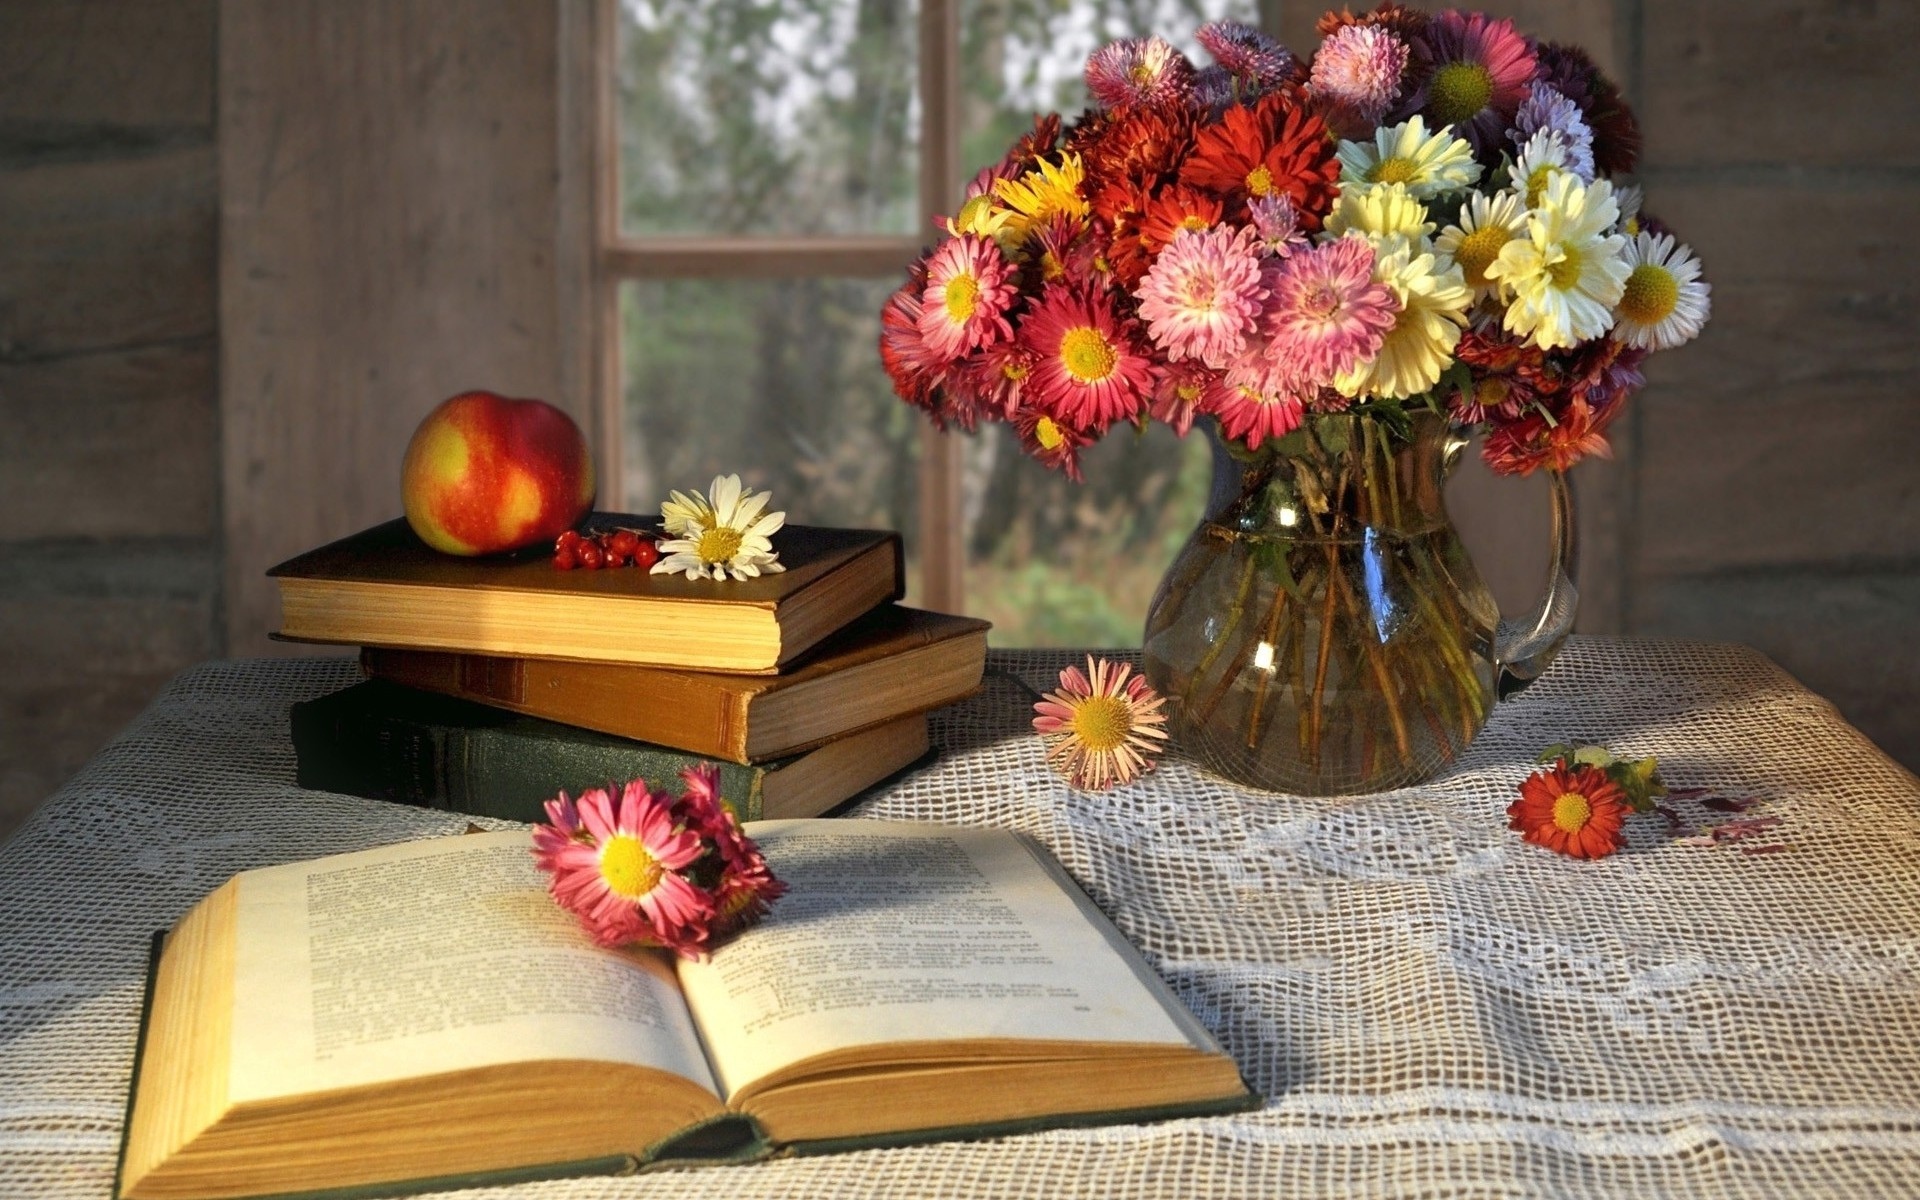 Books and flowers on the table in the wooden house - HD wallpaper ...